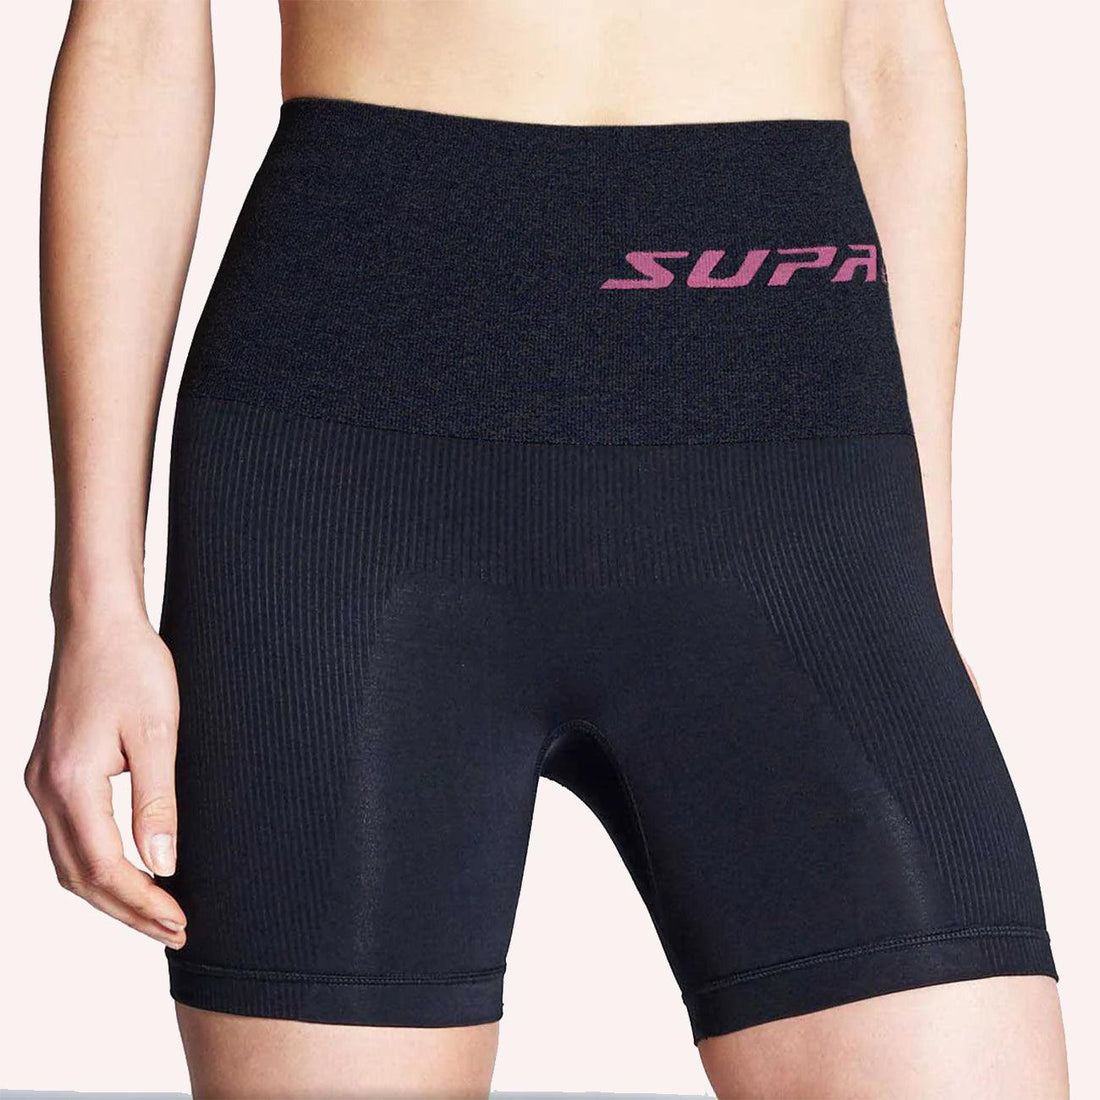 Mary CORETECH® Injury Recovery and Postpartum Compression Shorts